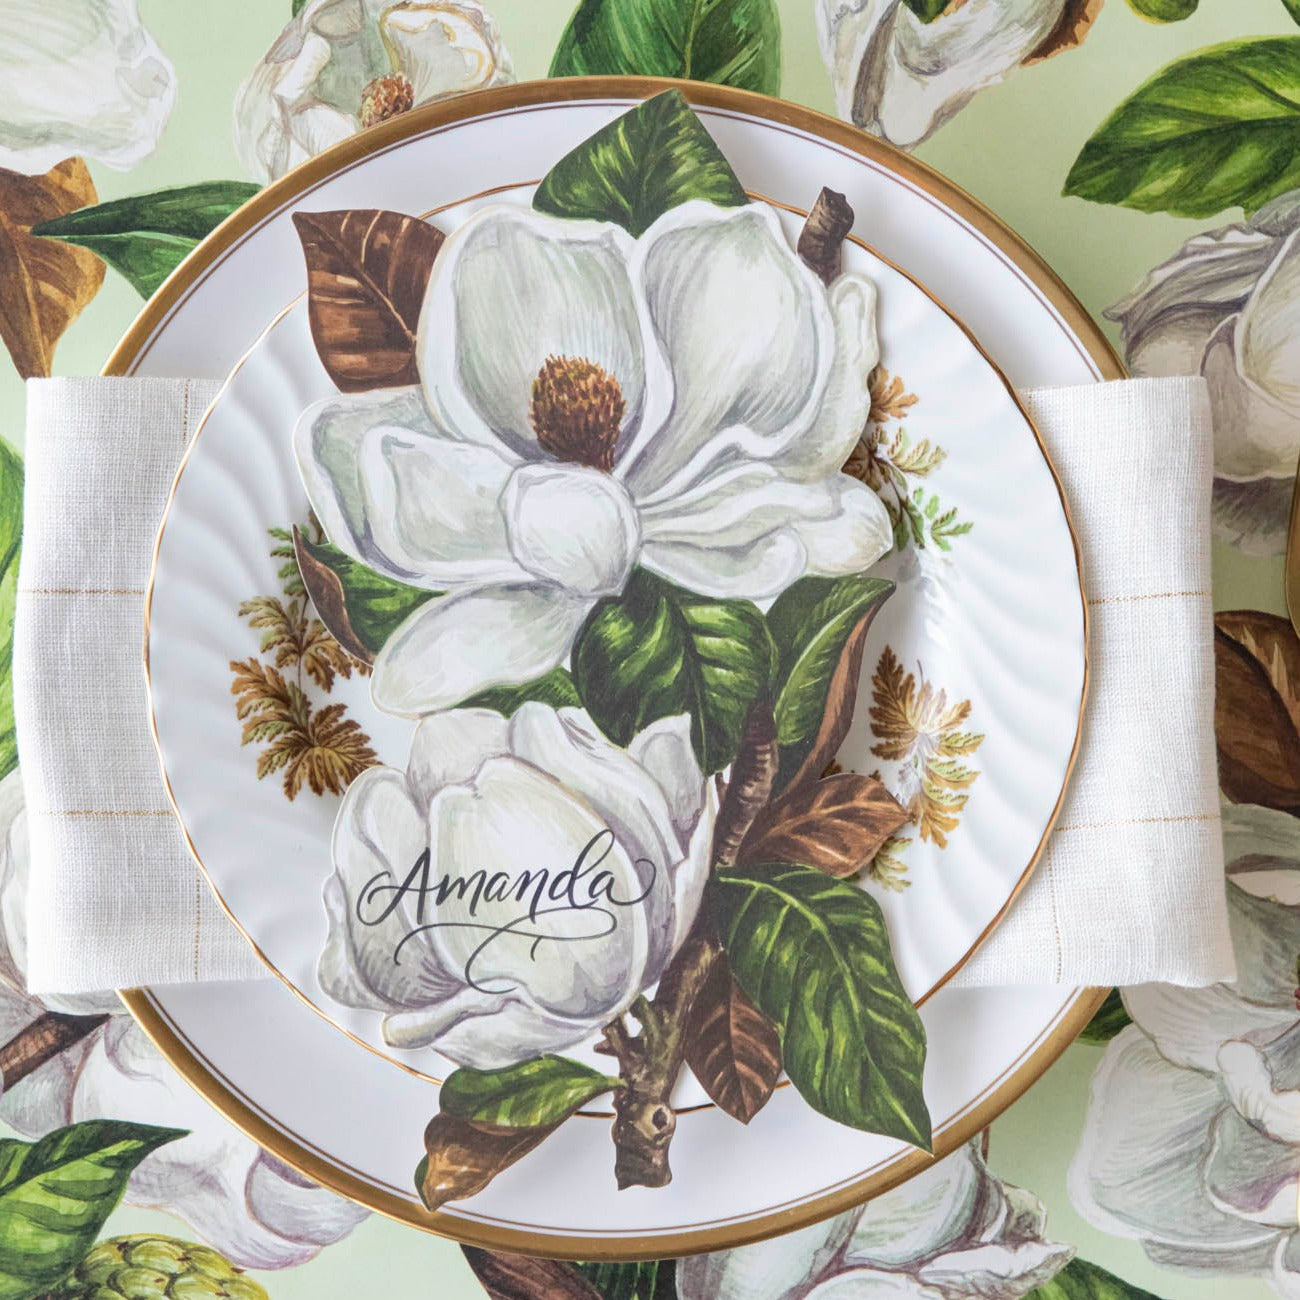 An elegant place setting featuring a Magnolia Blooms Table Accent with &quot;Amanda&quot; written in beautiful script resting on the plate.